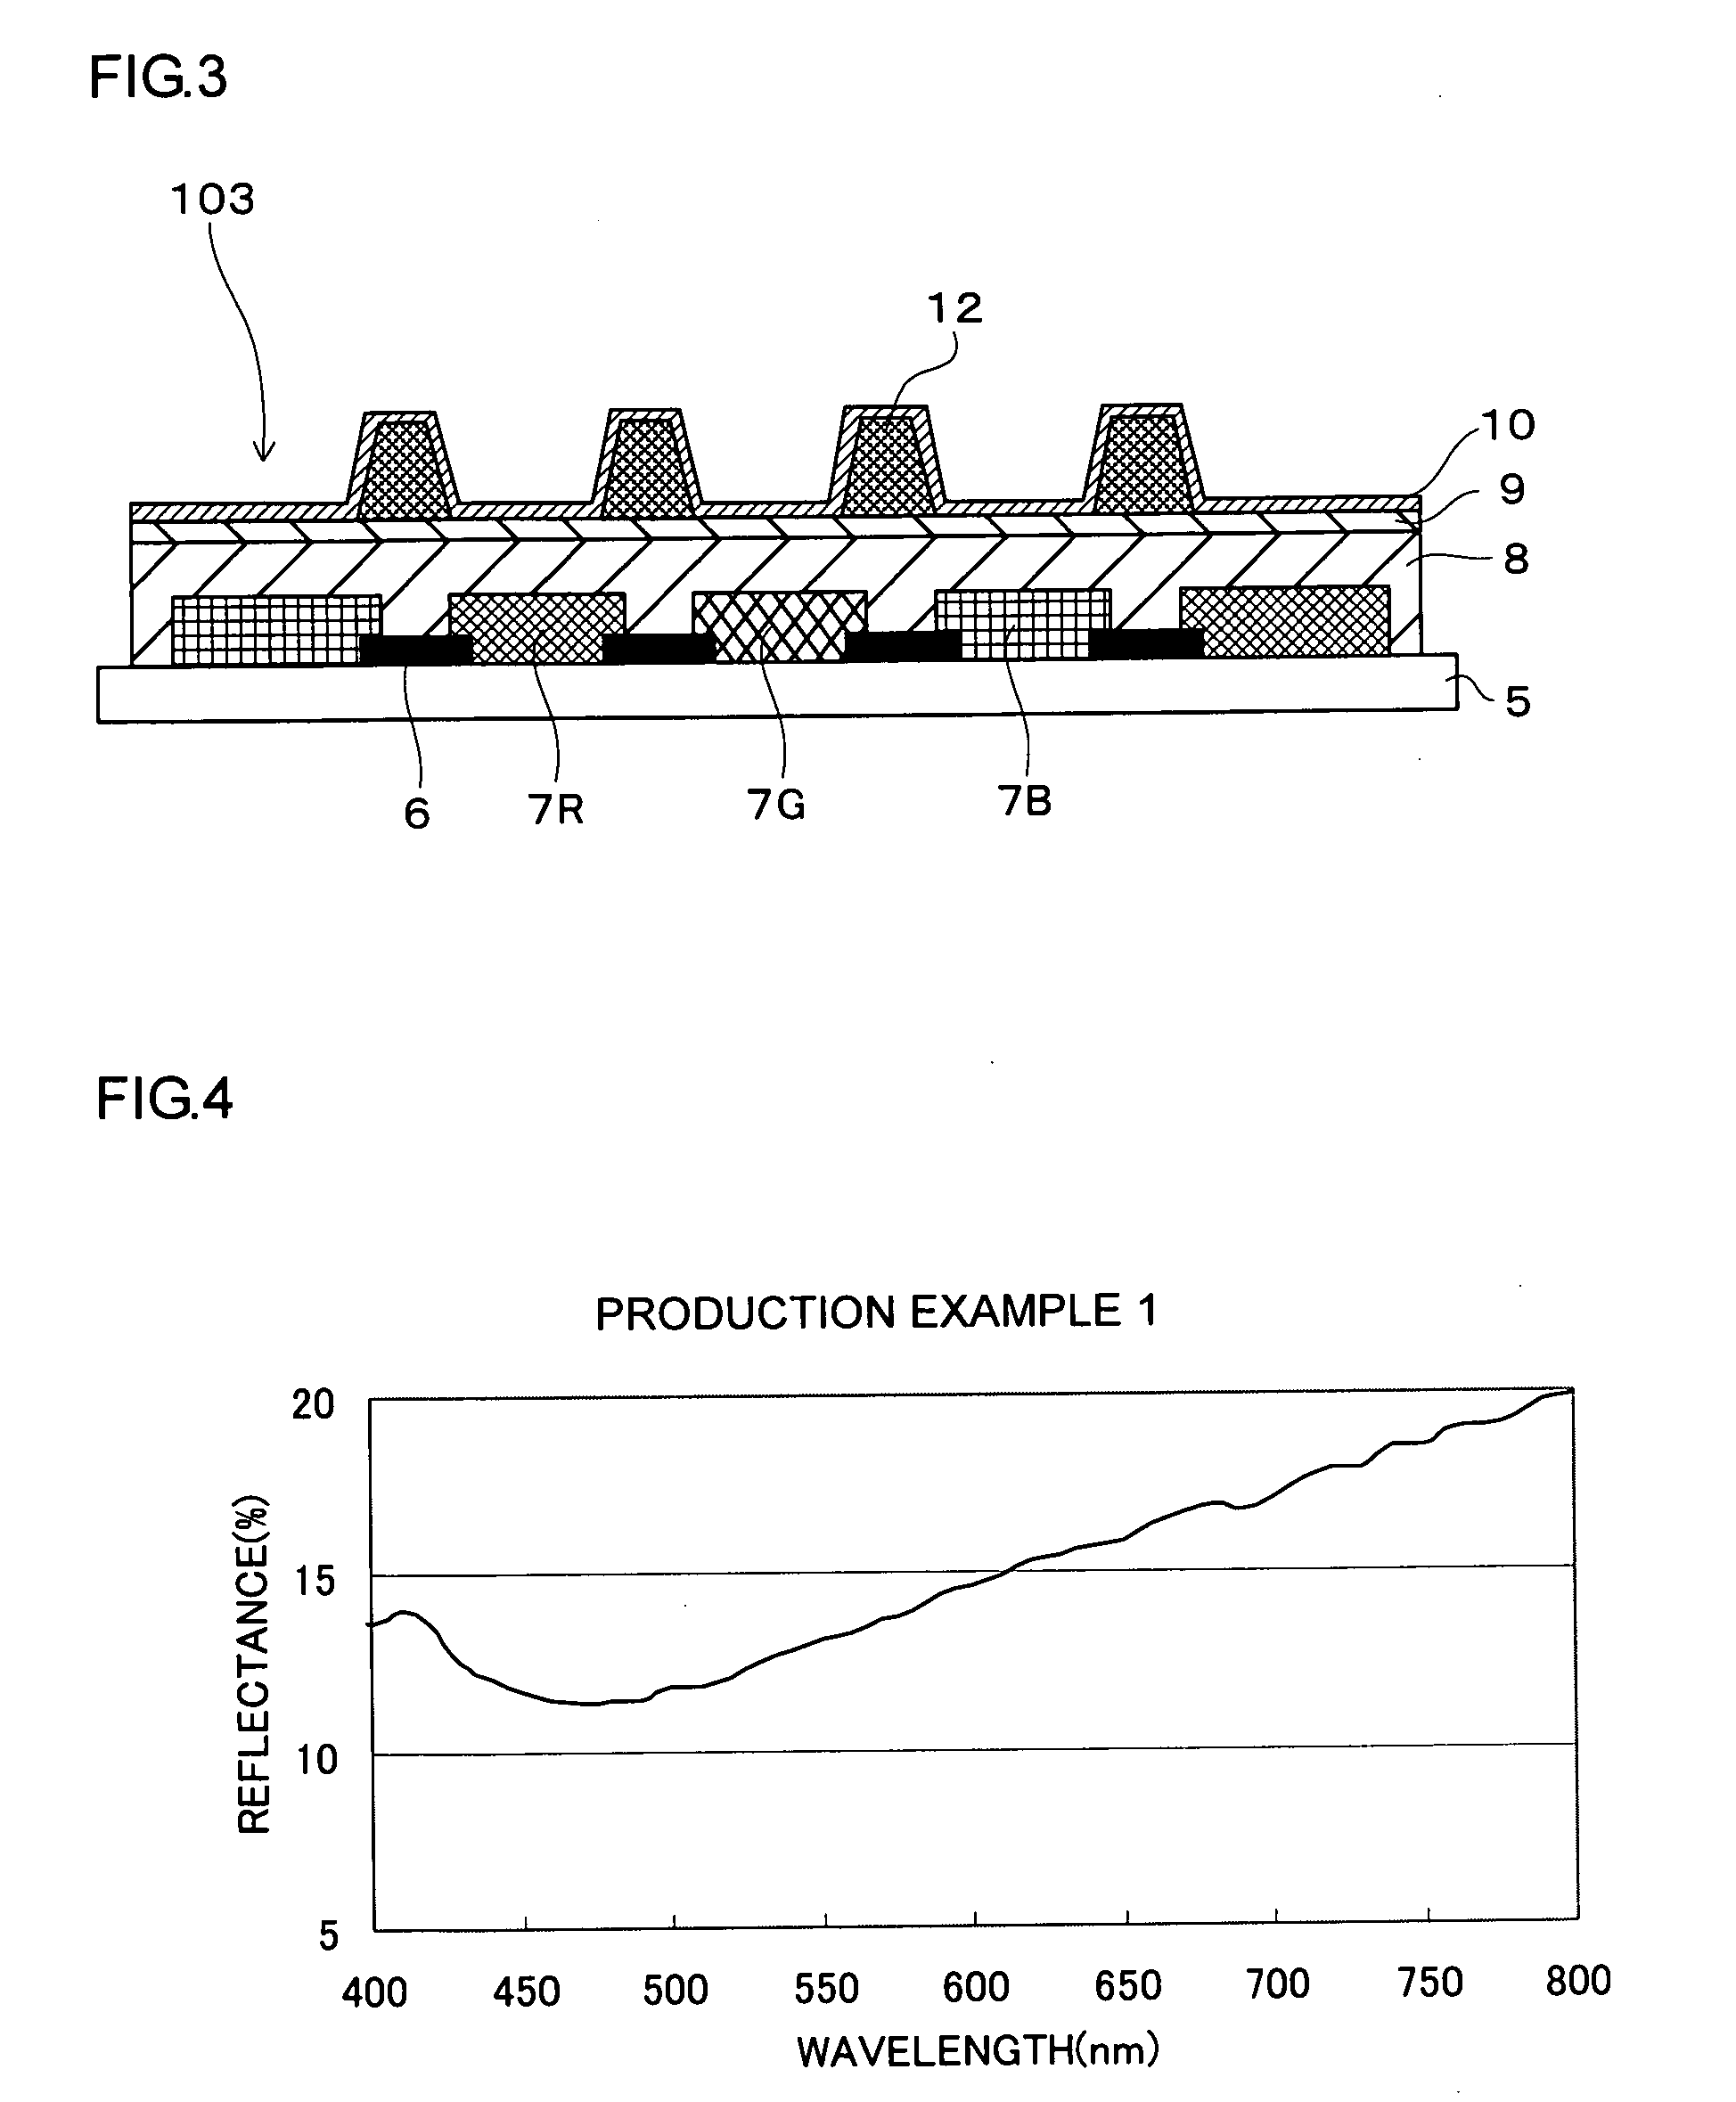 Black Resin Composition for Display Device, and Member for Display Device